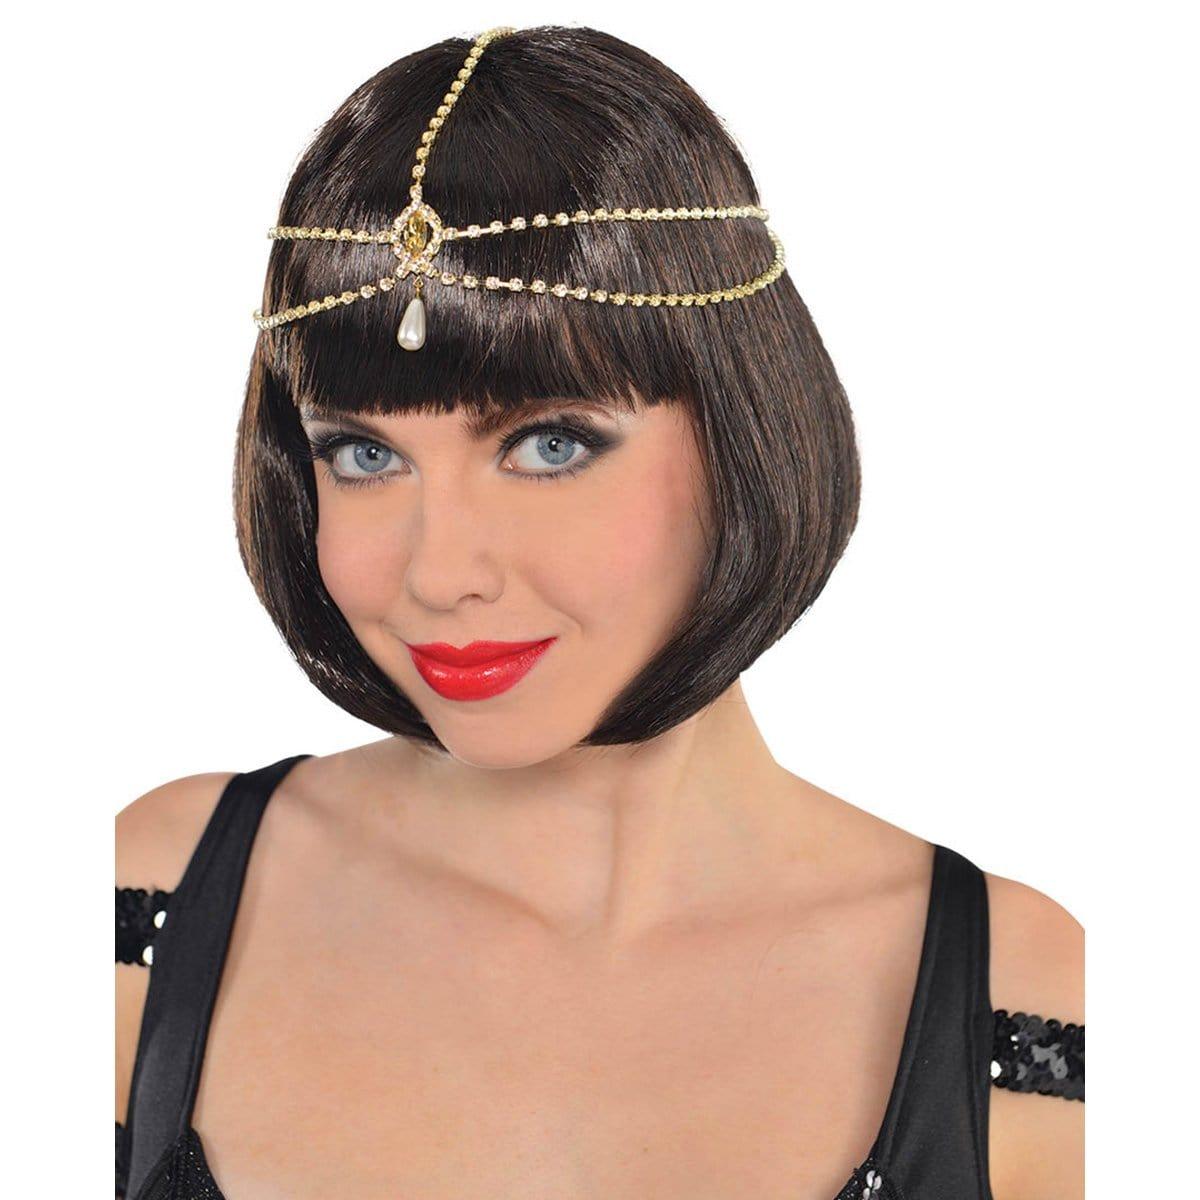 Buy Costume Accessories Roaring 20's hair jewelry for adults sold at Party Expert